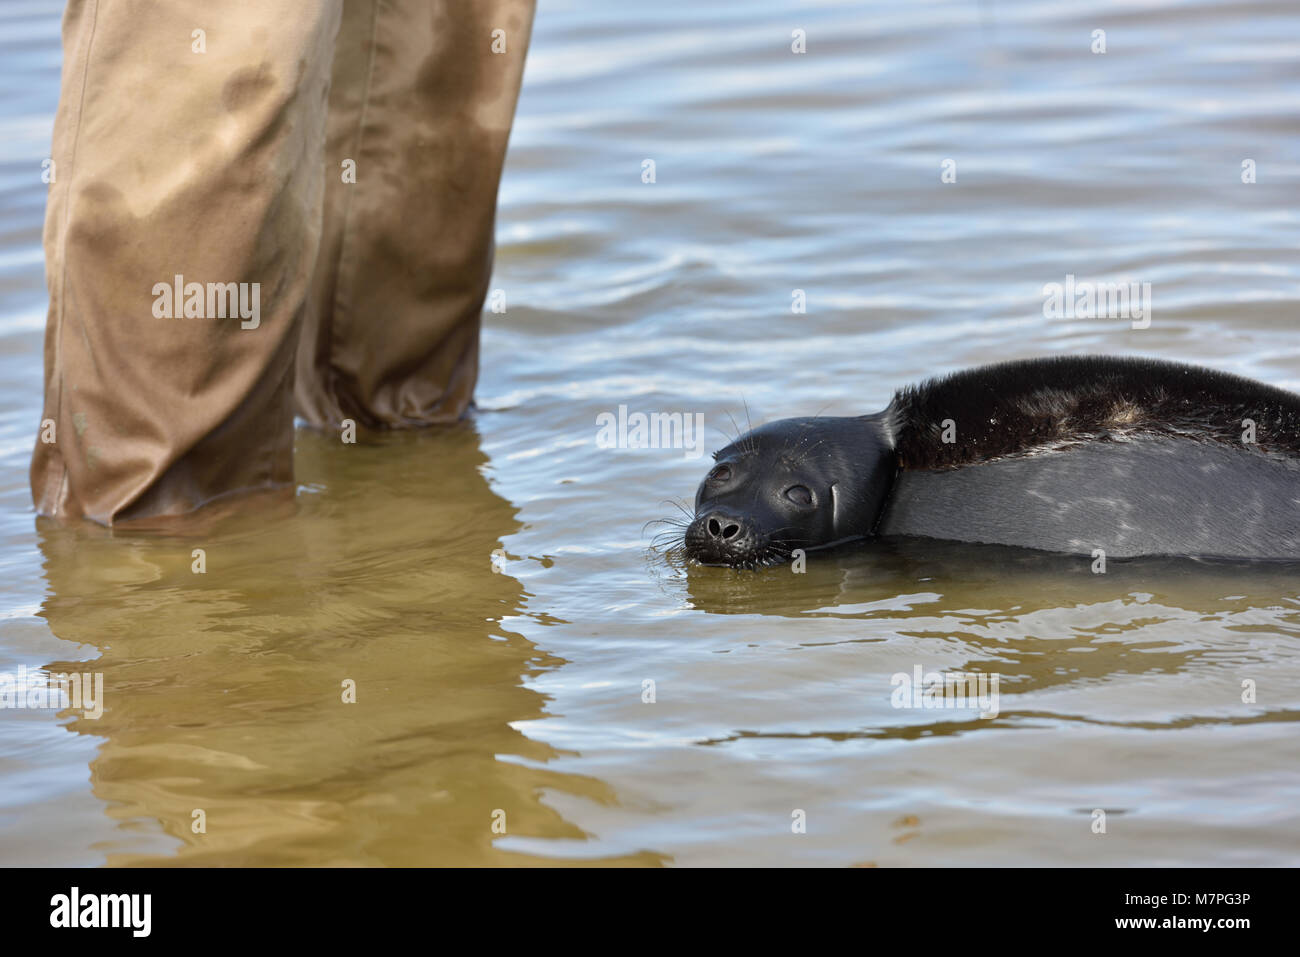 Valaam island, Russia - July 29, 2015: Vyacheslav Alekseev releases the Ladoga ringed seal into the lake Ladoga. Animal was cured in the Center of stu Stock Photo